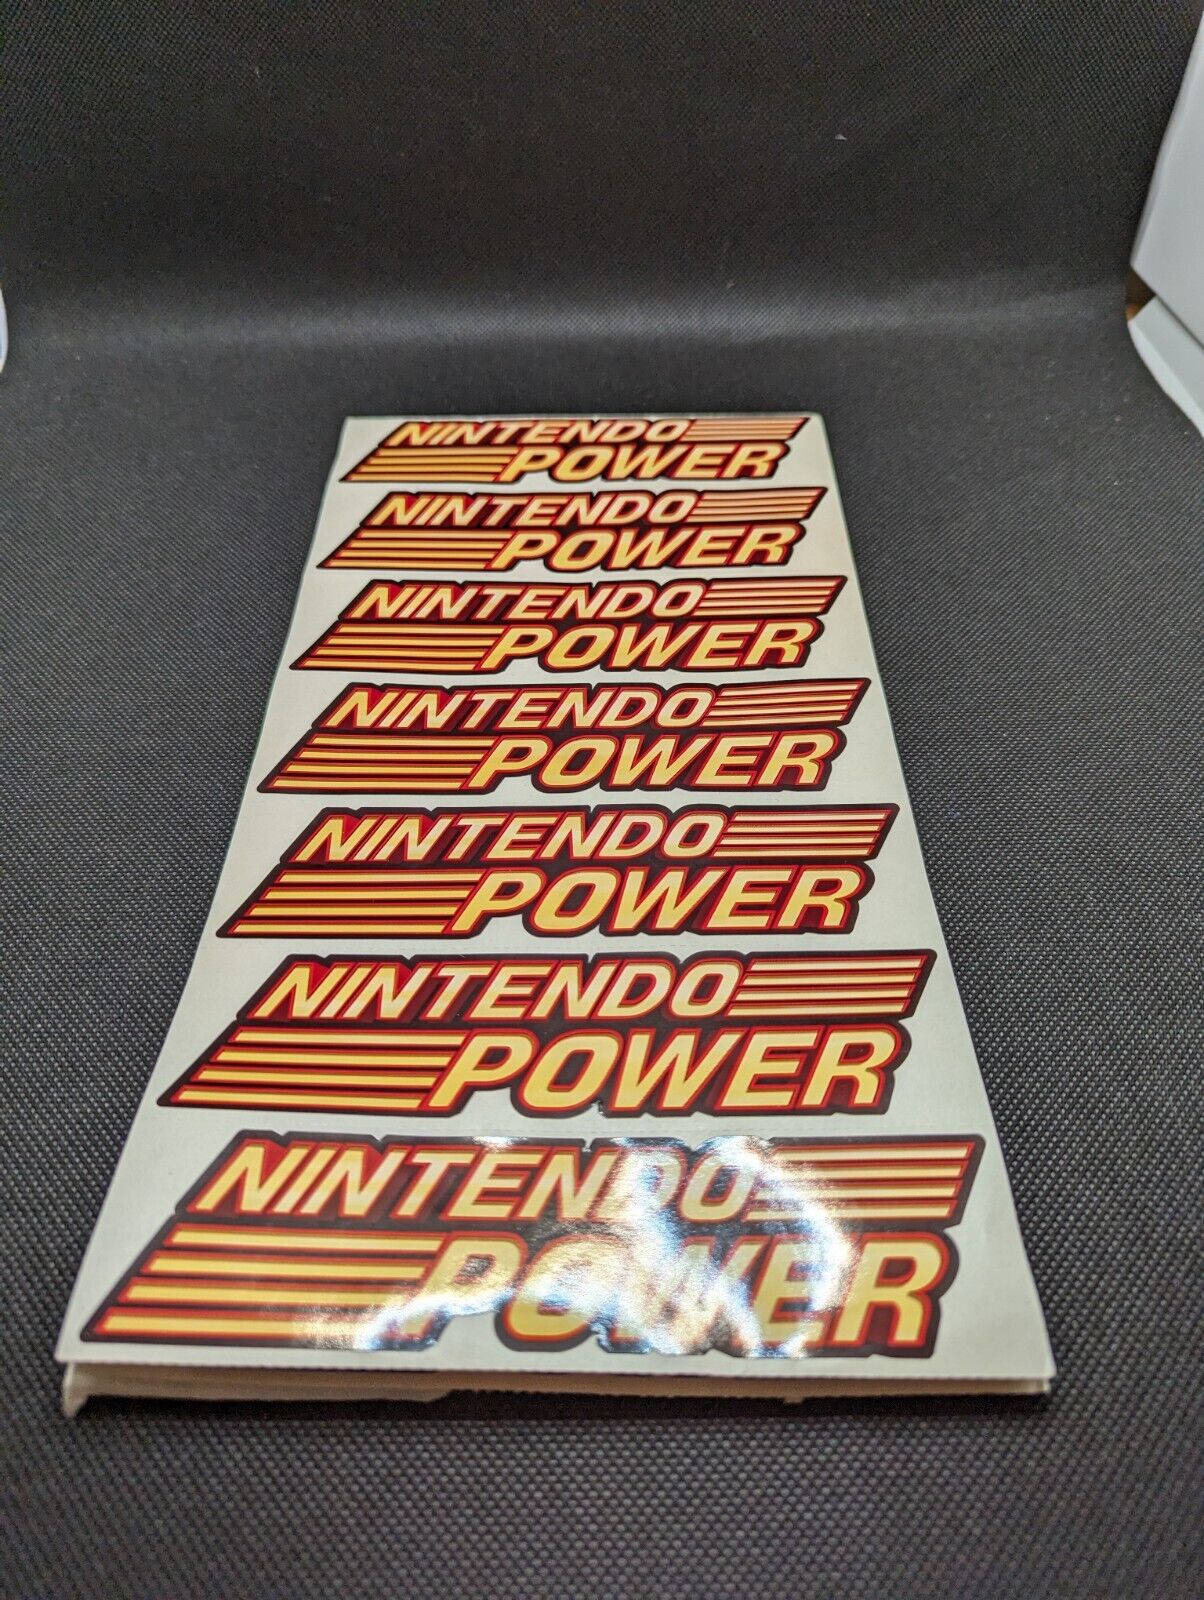 Vintage Nintendo Power Decal Stickers \'90s-2000